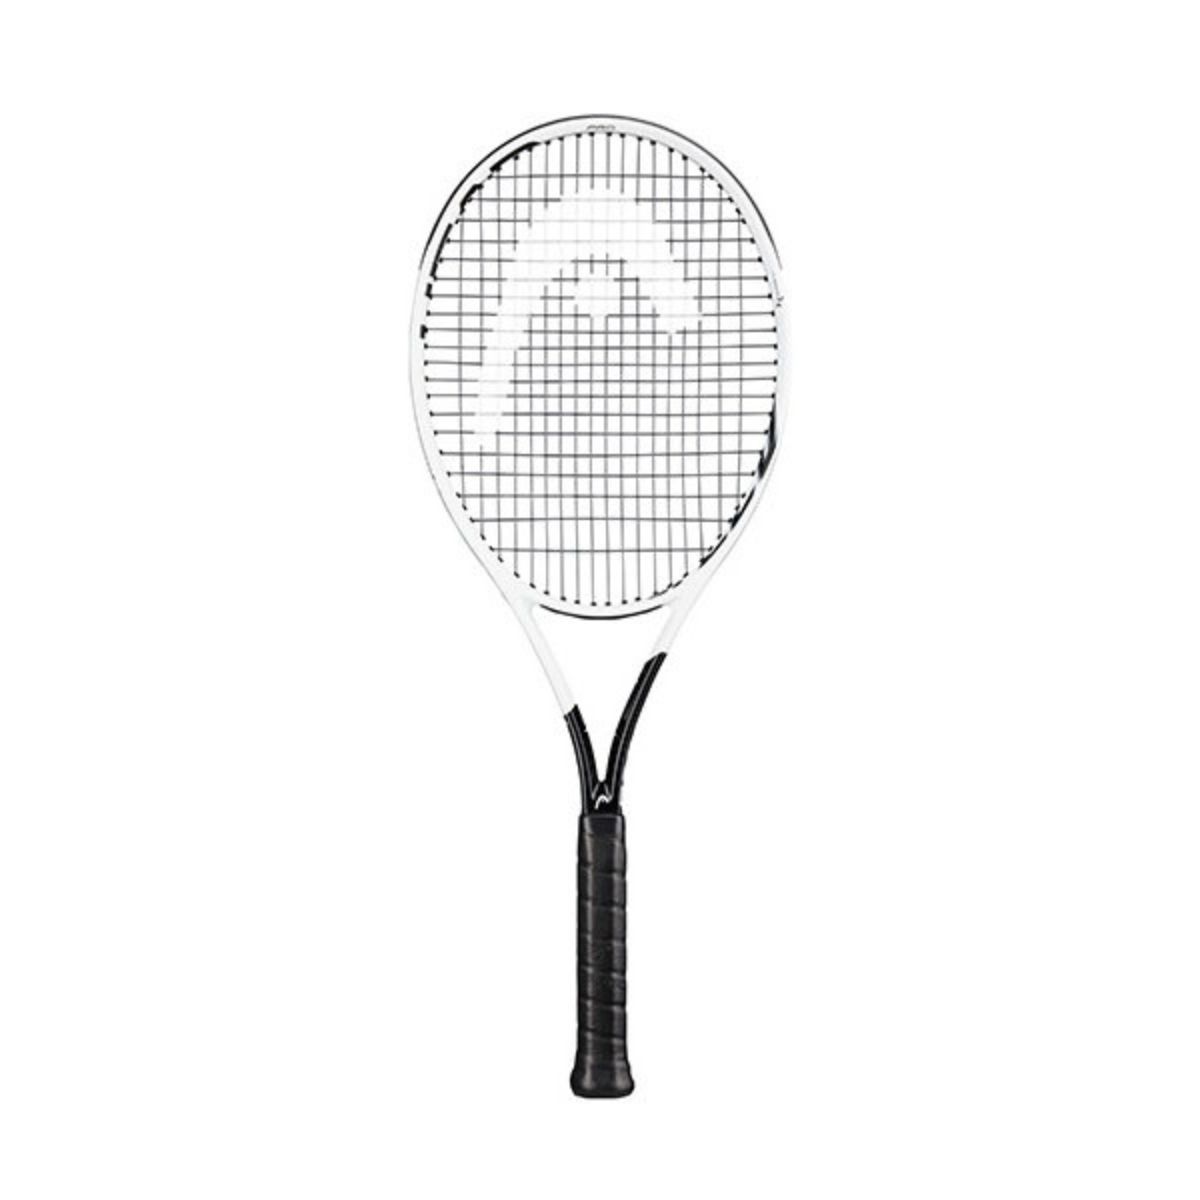 The Best Tennis Rackets for Advanced Players Options: Head Graphene 360+ Speed MP